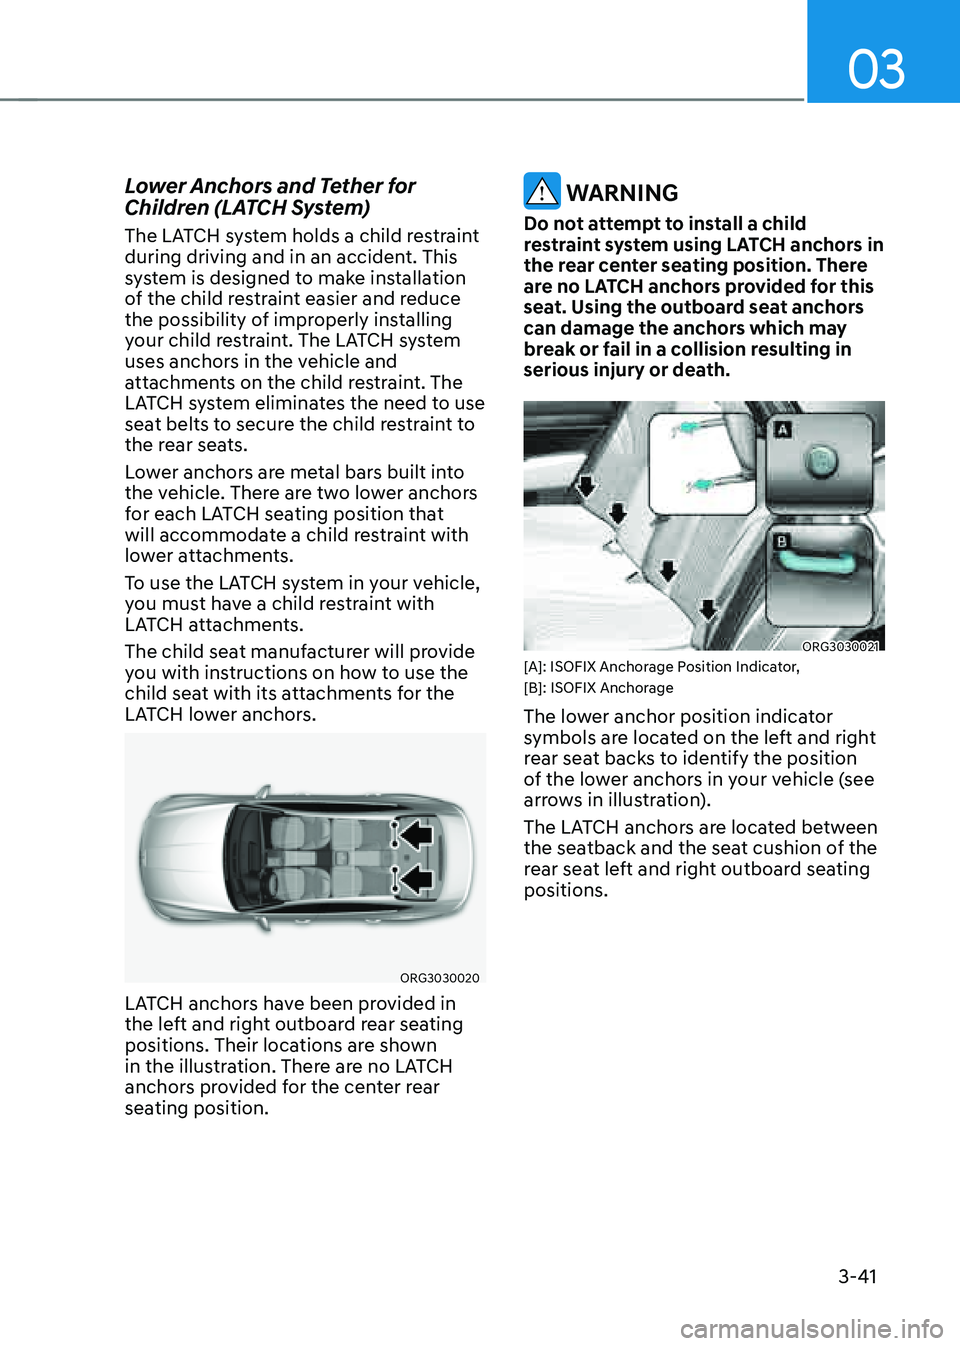 GENESIS G80 2021  Owners Manual 03
3-41
Lower Anchors and Tether for 
Children (LATCH System)
The LATCH system holds a child restraint 
during driving and in an accident. This 
system is designed to make installation 
of the child r